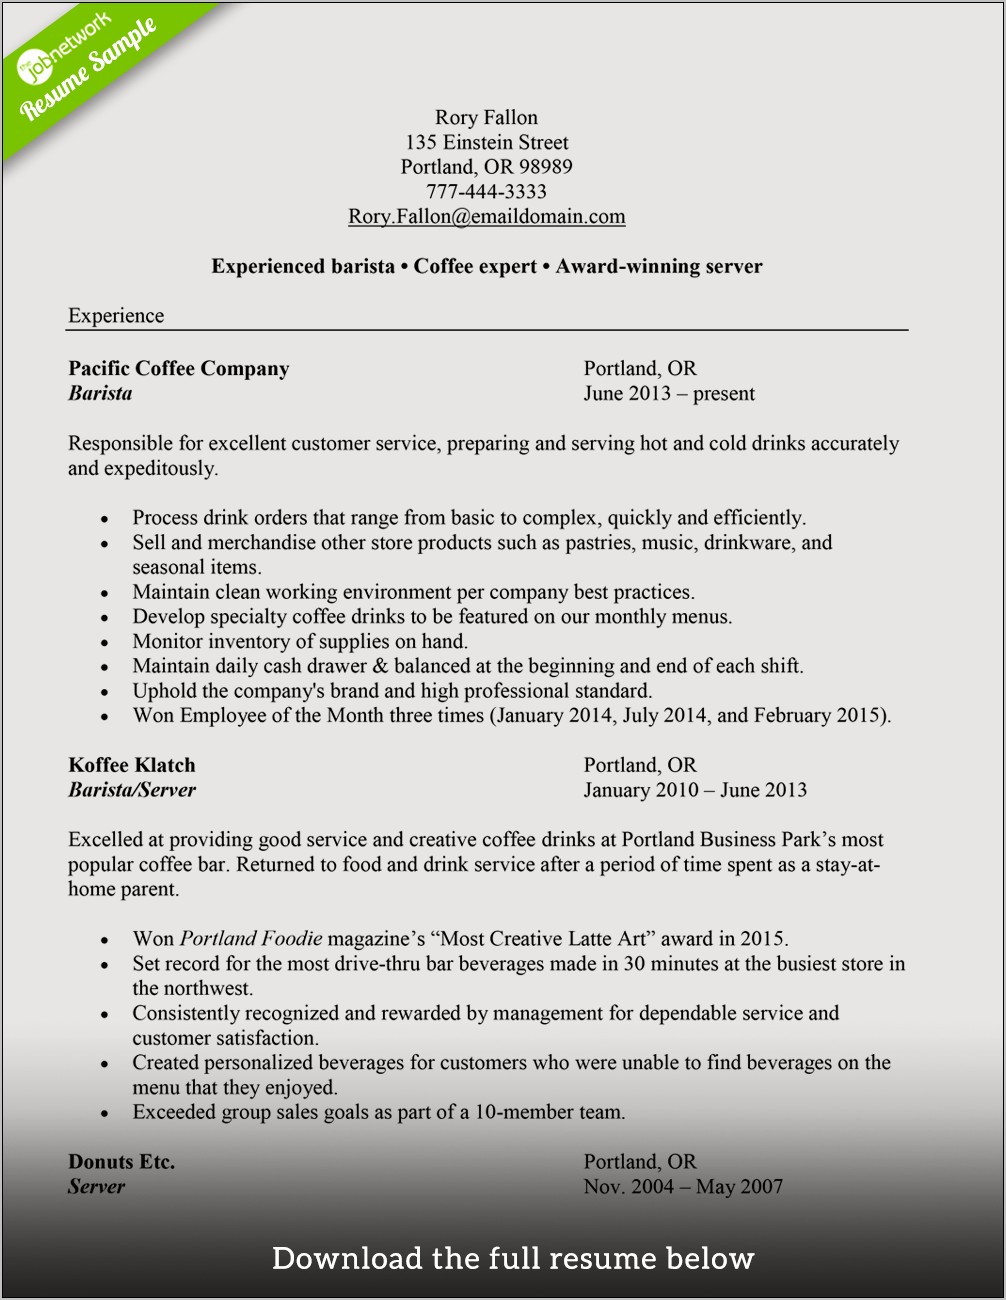 Resume With Reason For Changing Jobs